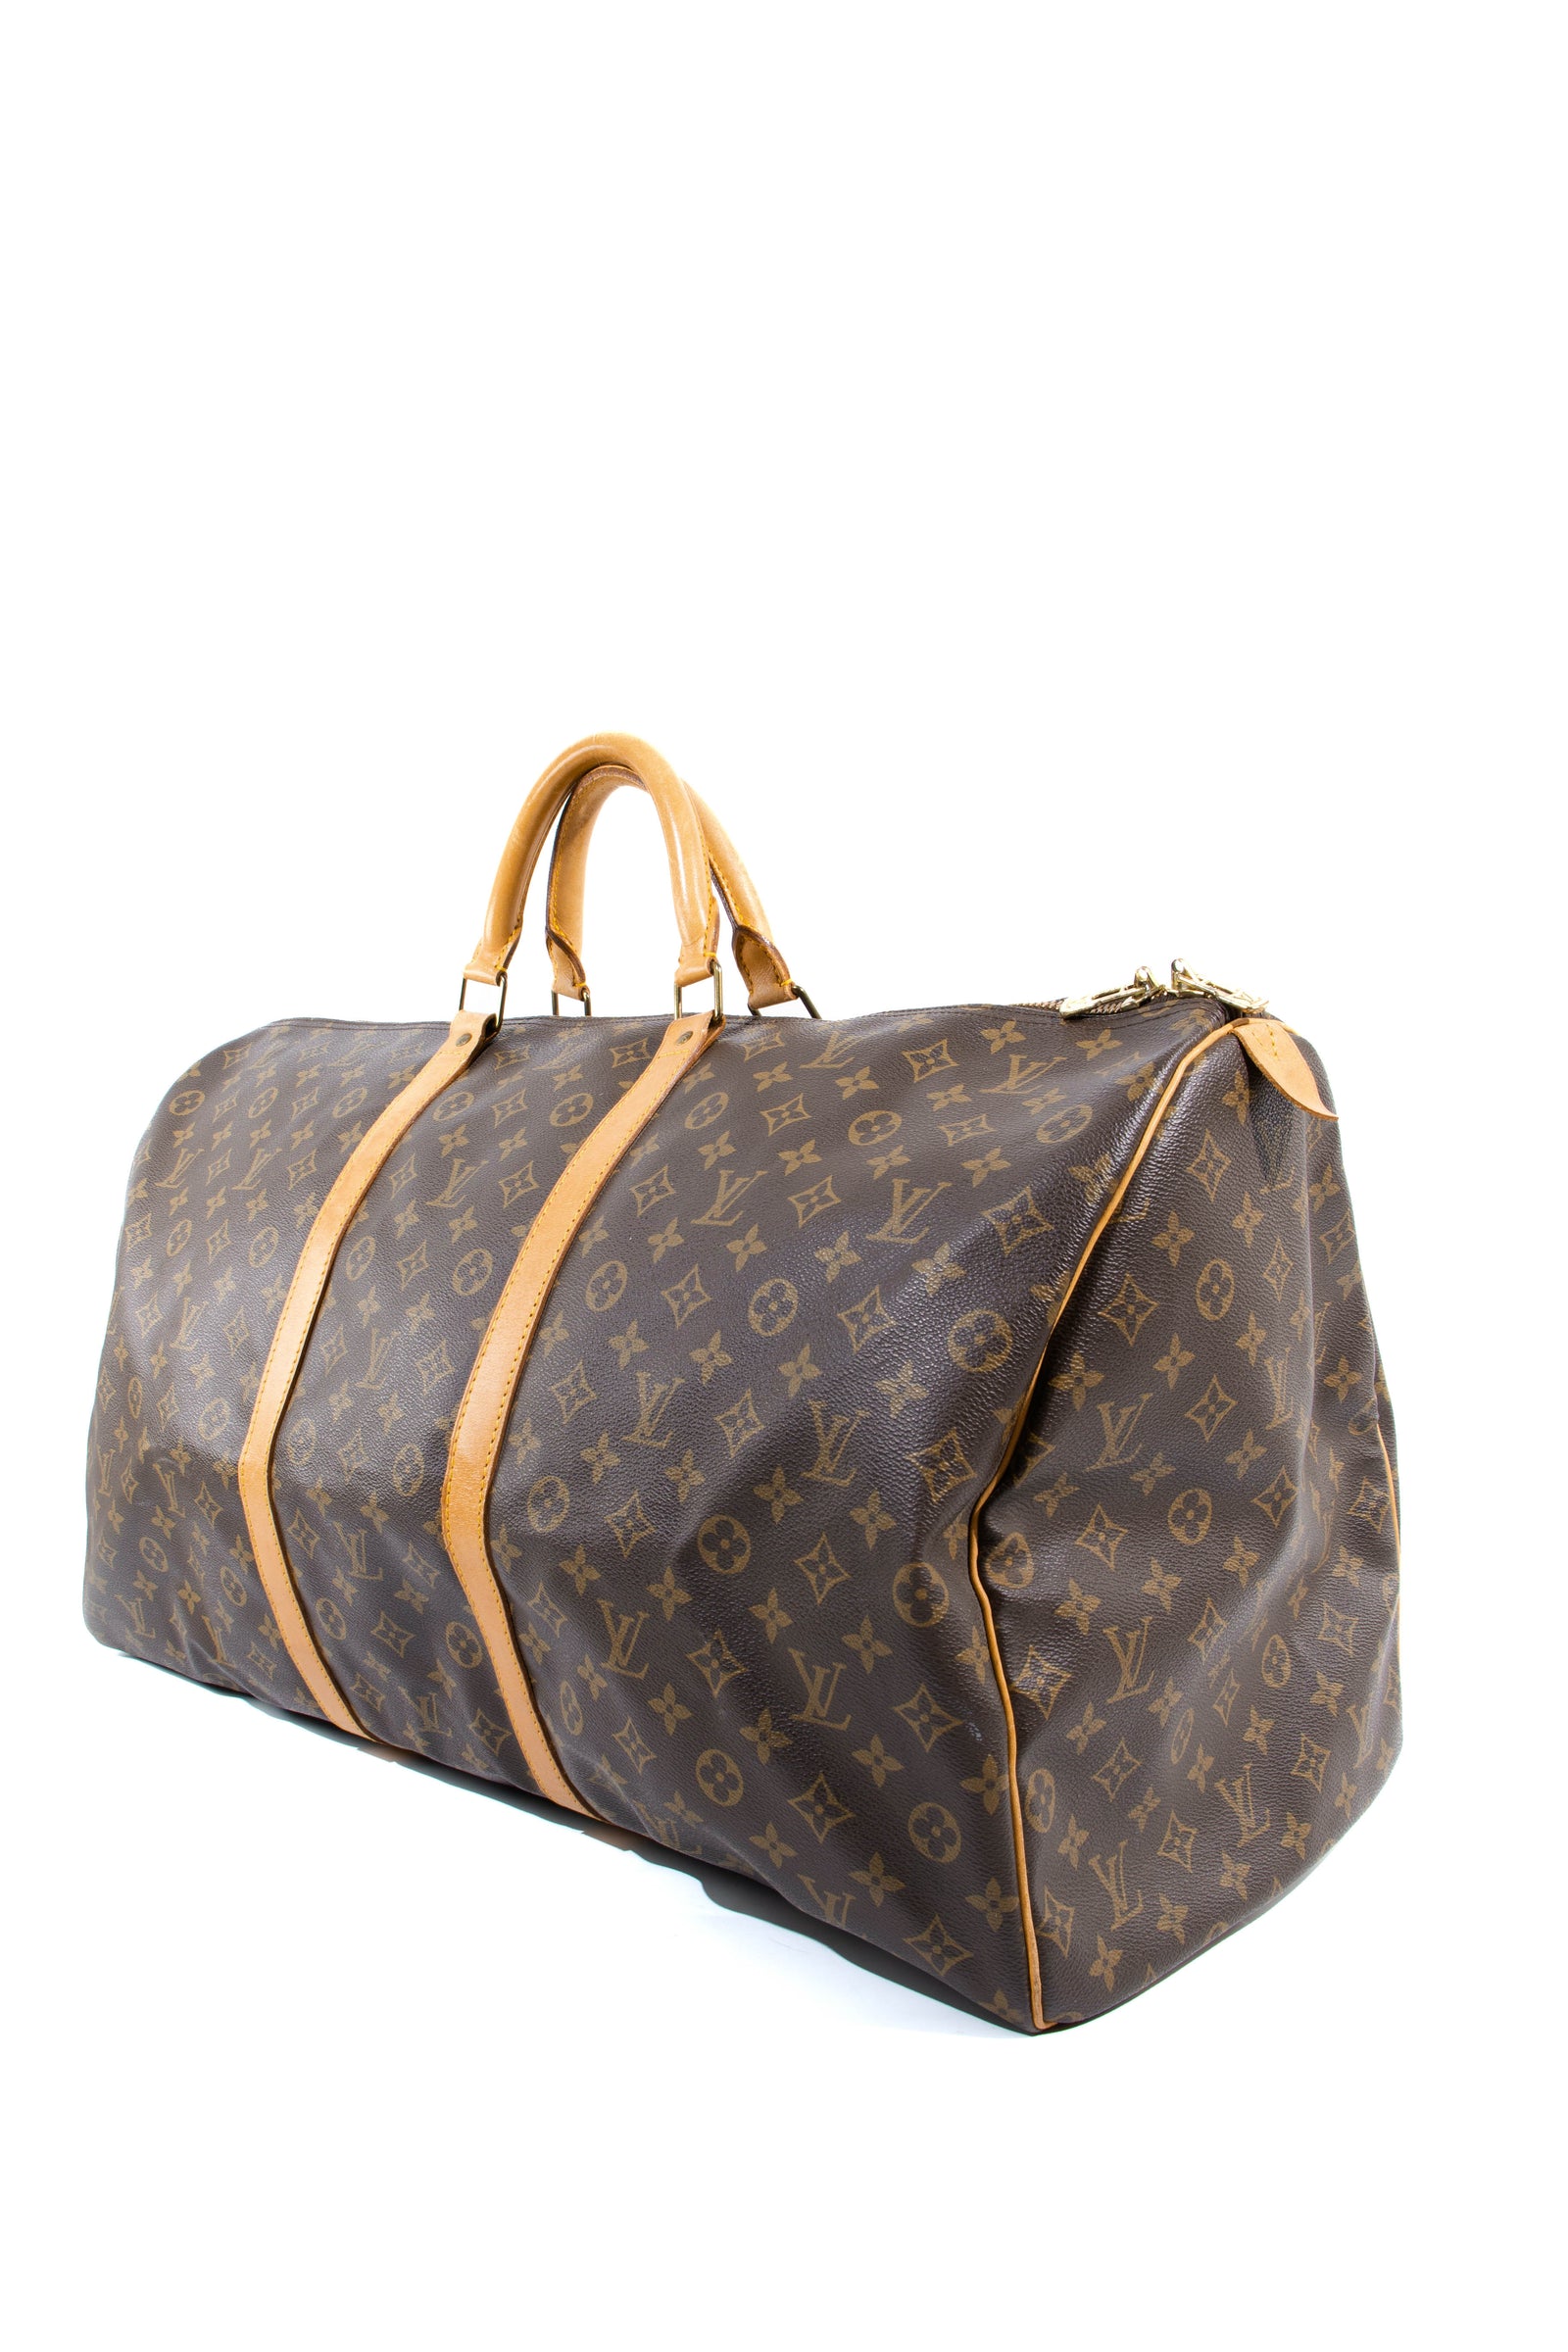 Hand bags – tagged Louis vuitton– Collectors cage